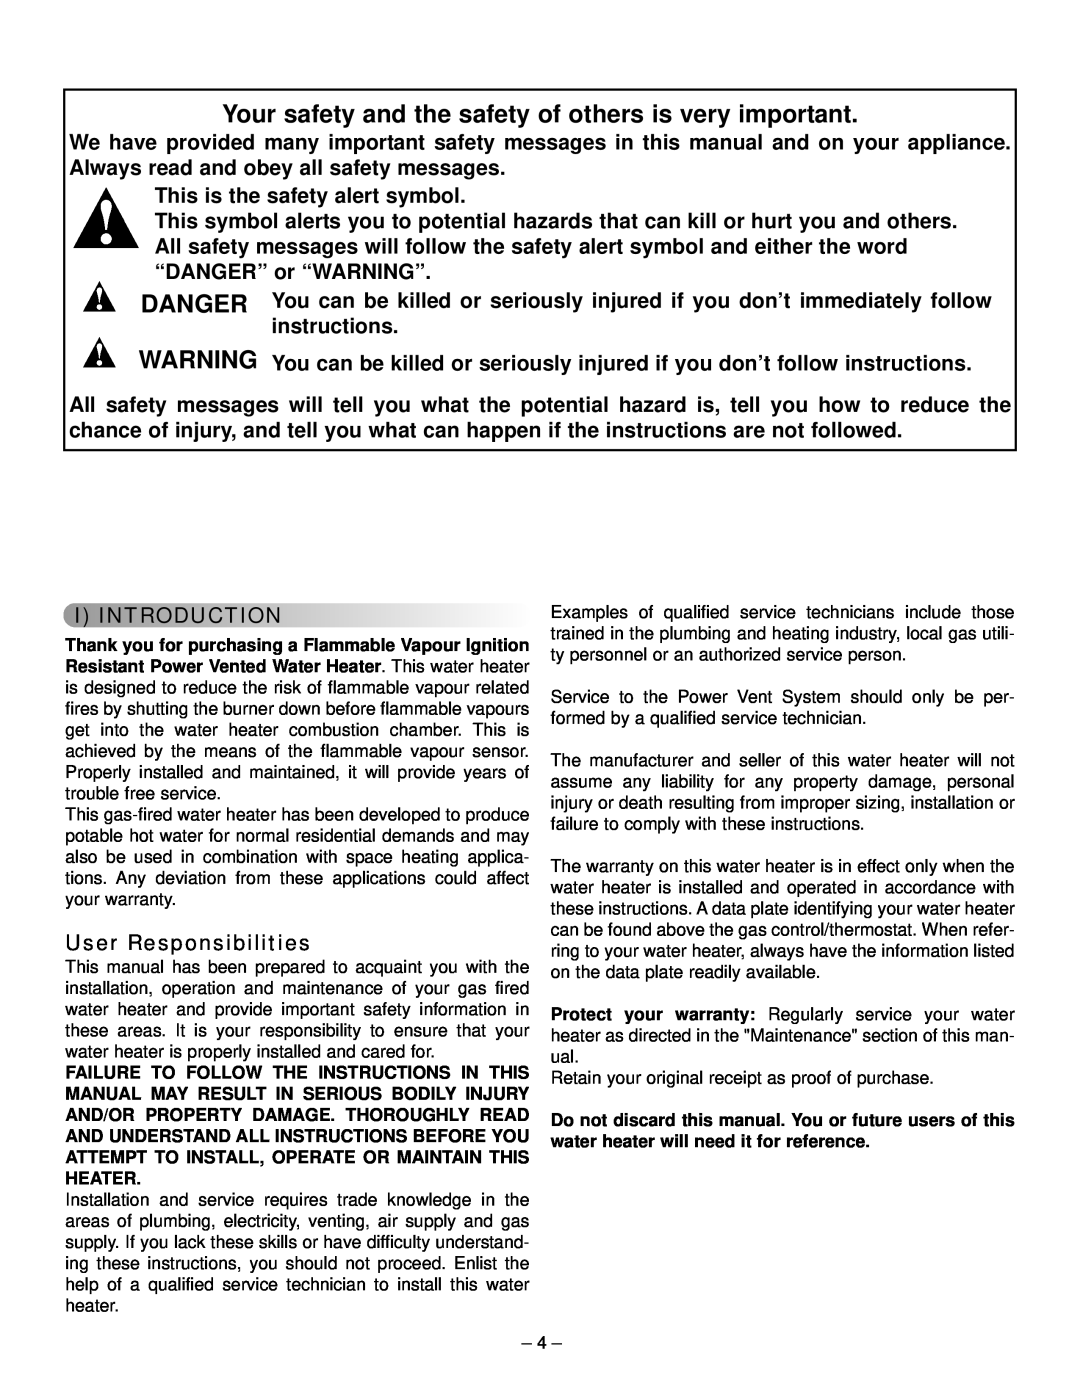 GSW 319594-000 manual This is the safety alert symbol, I Introduction, User Responsibilities 